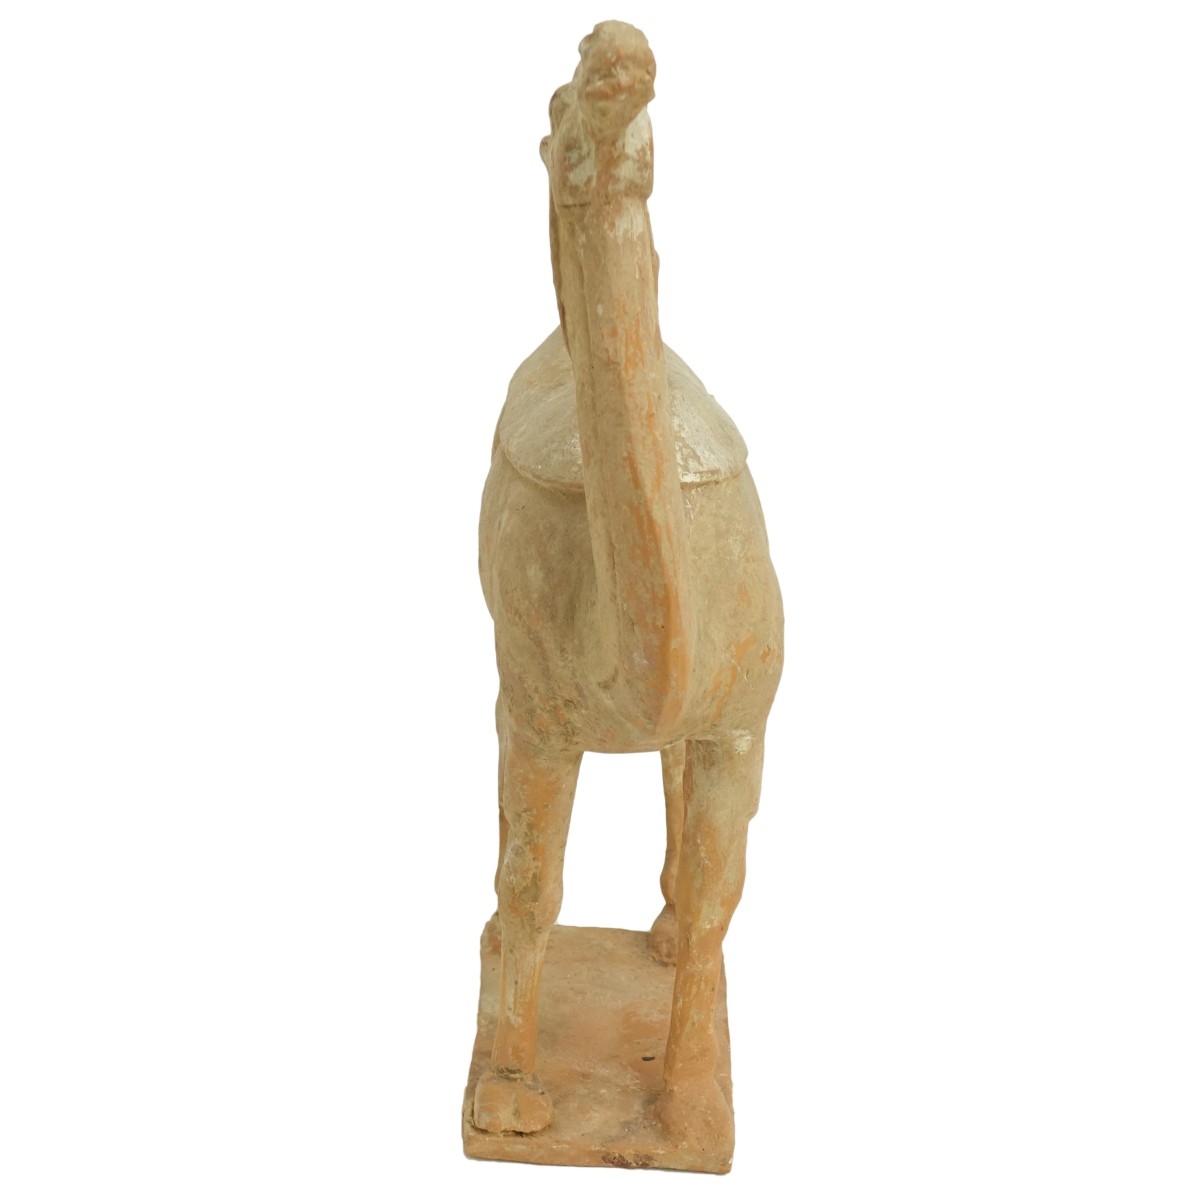 Chinese Earthenware Camel